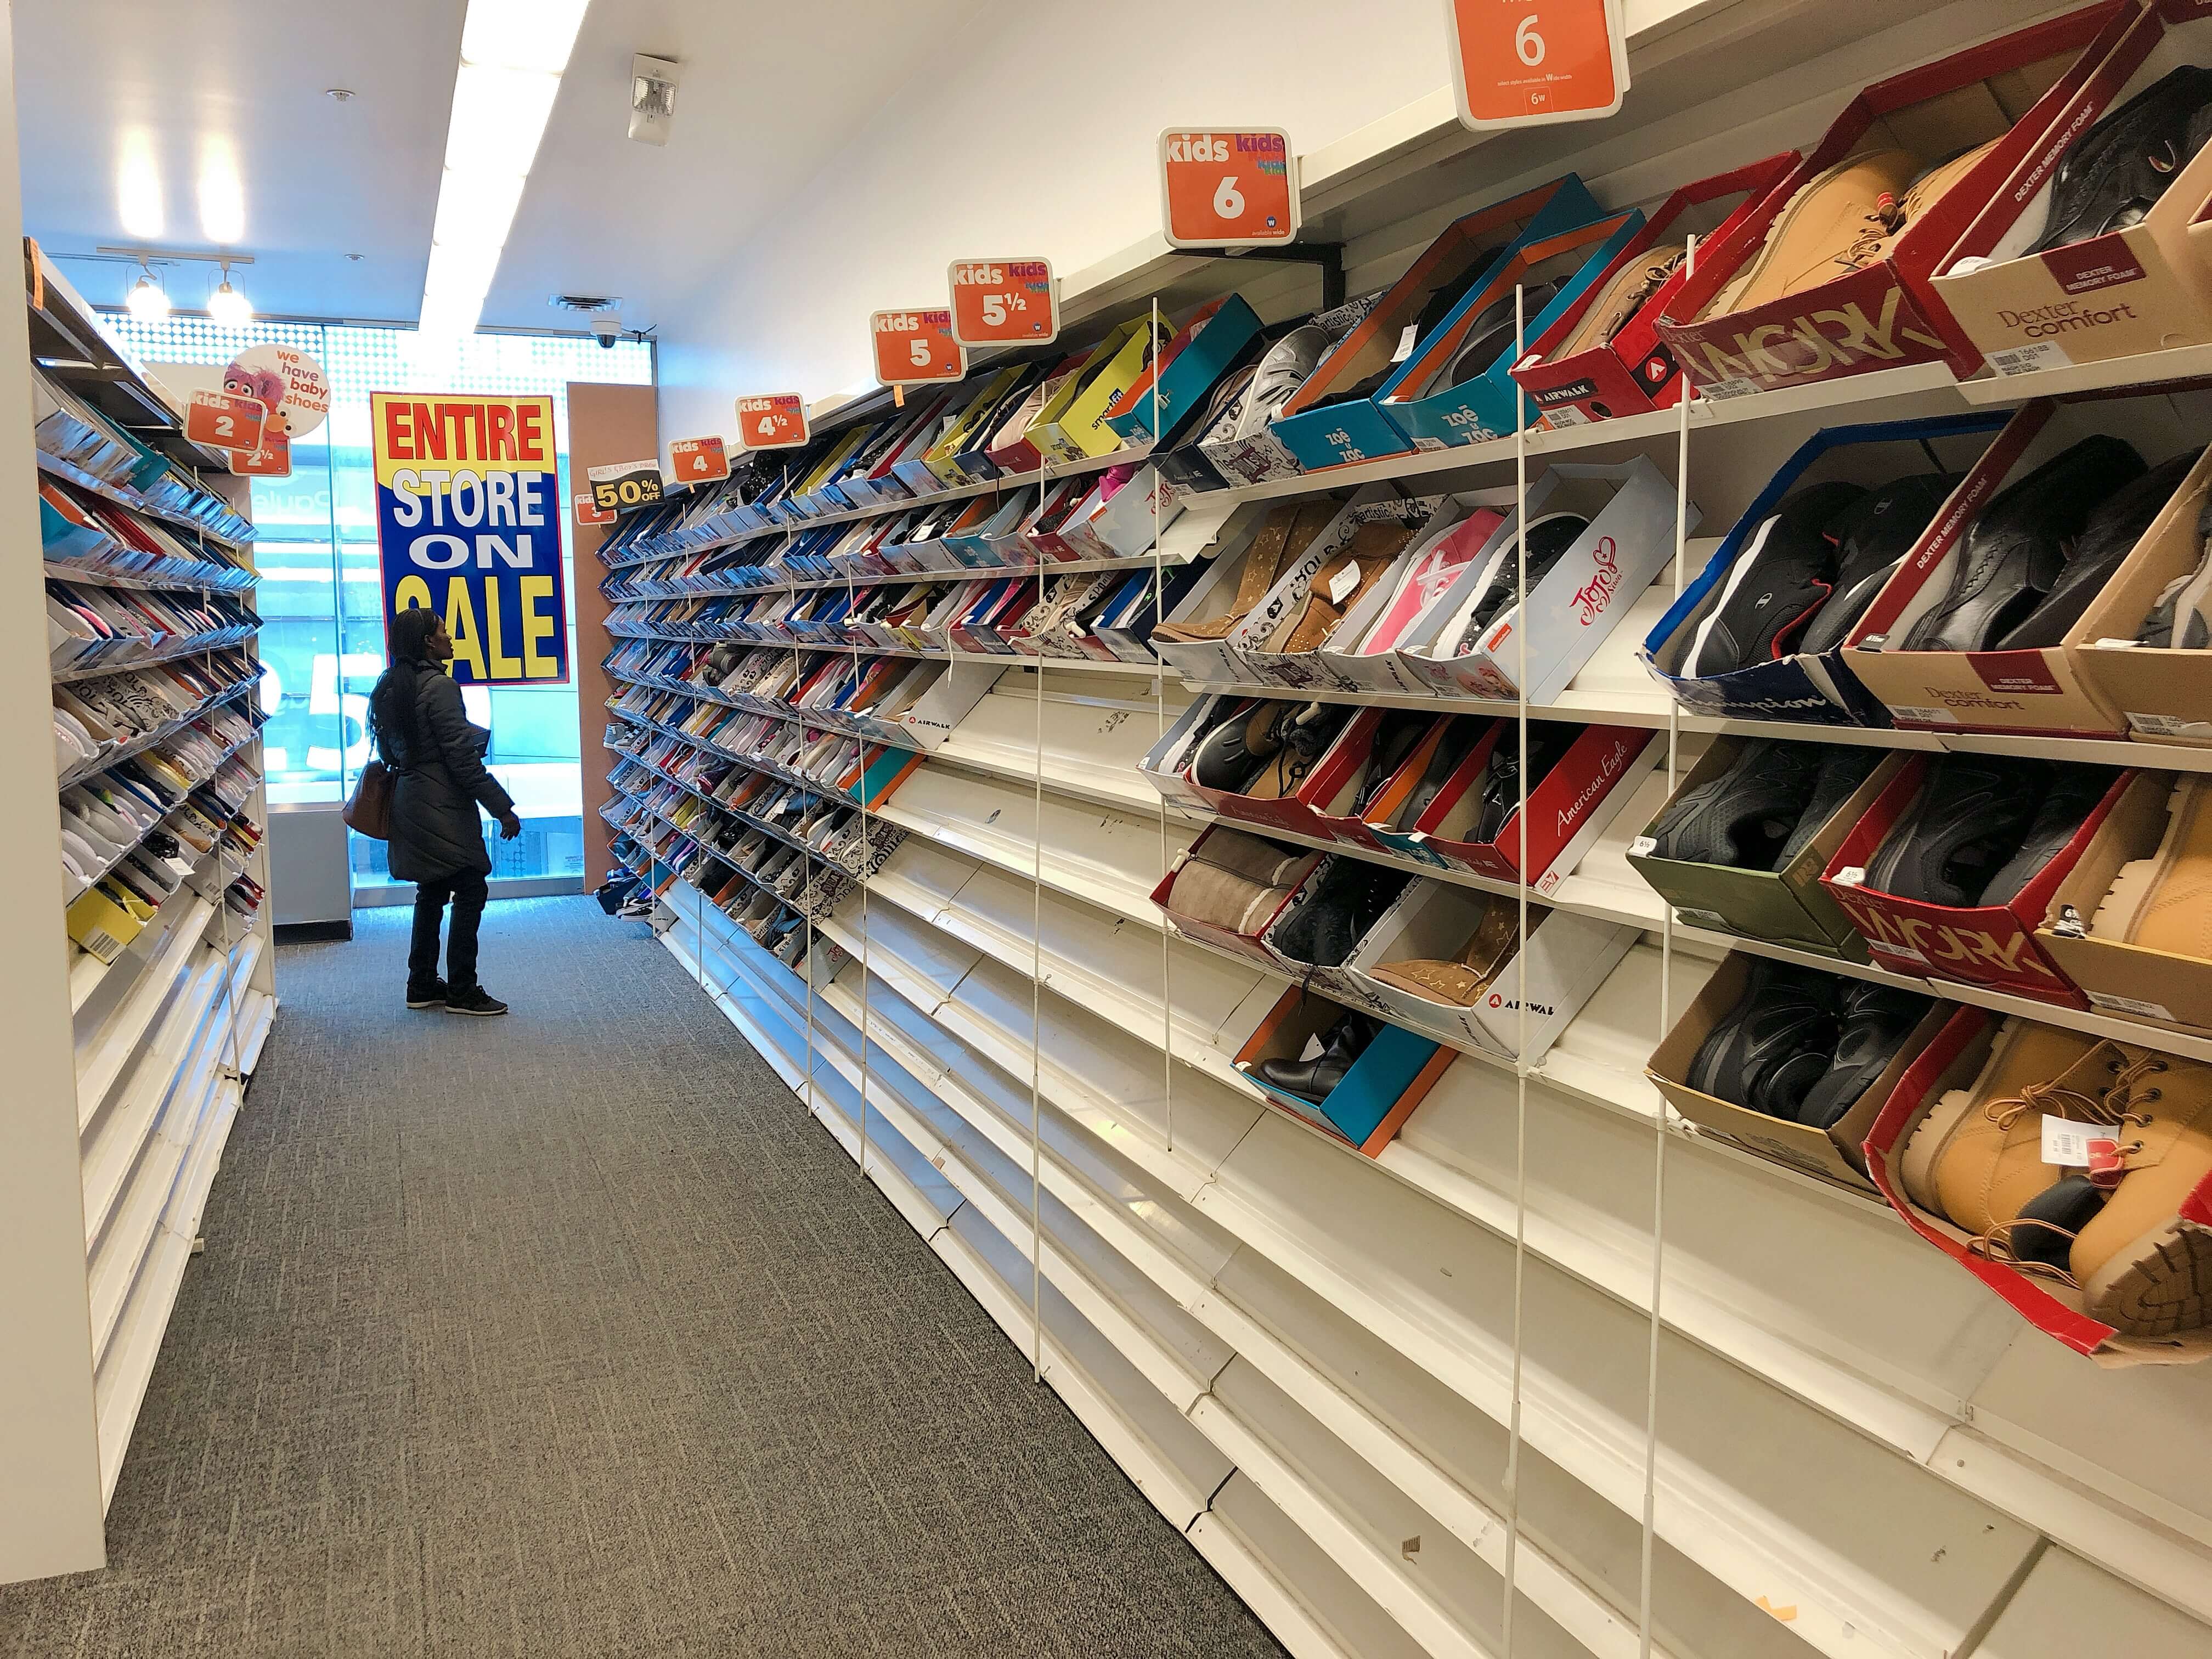 payless shoesトロント店の品揃え